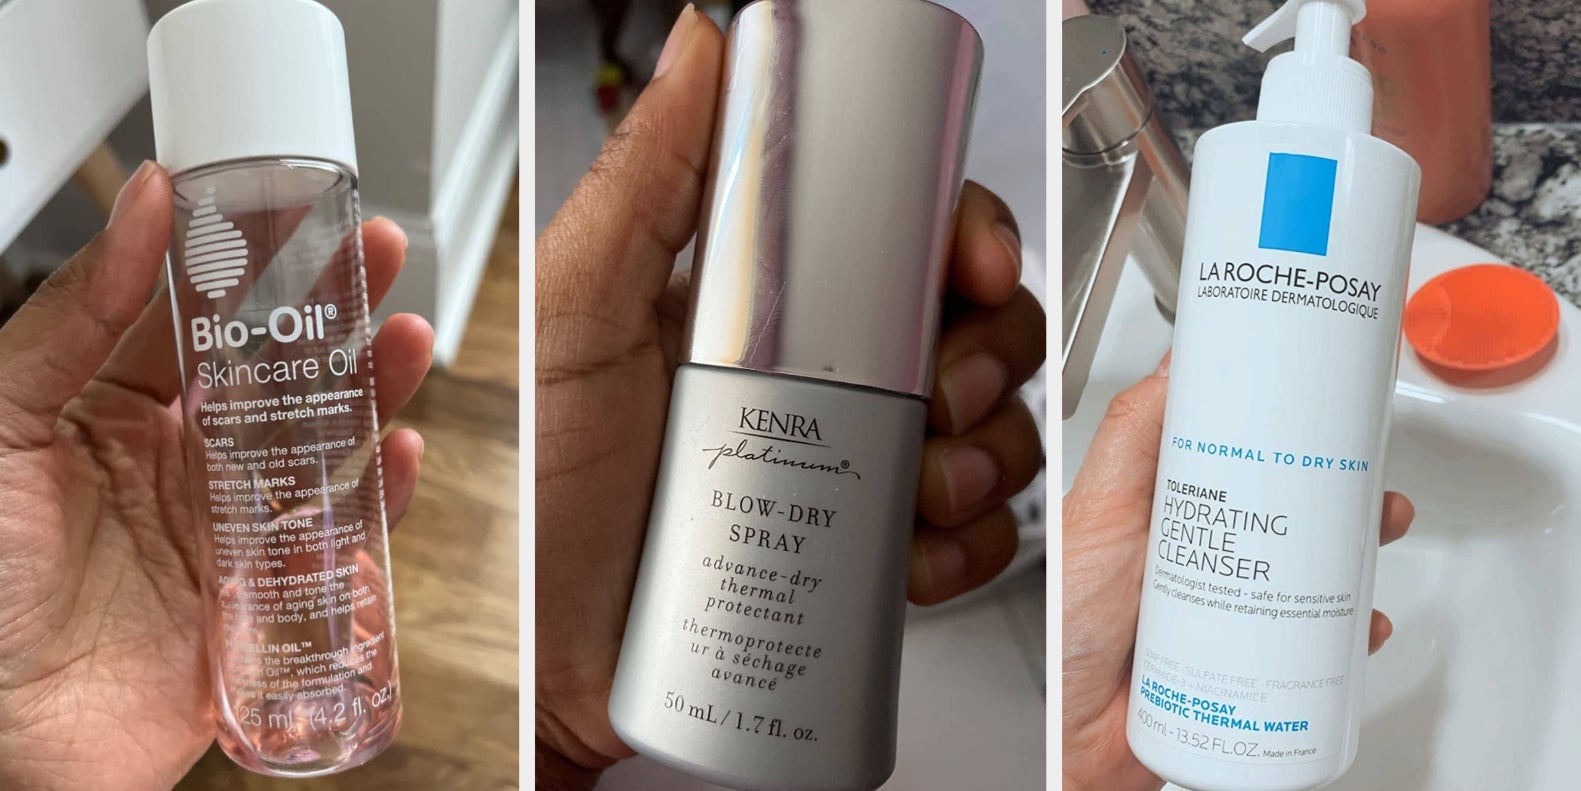 These  beauty products have amazing *INSTANT* results